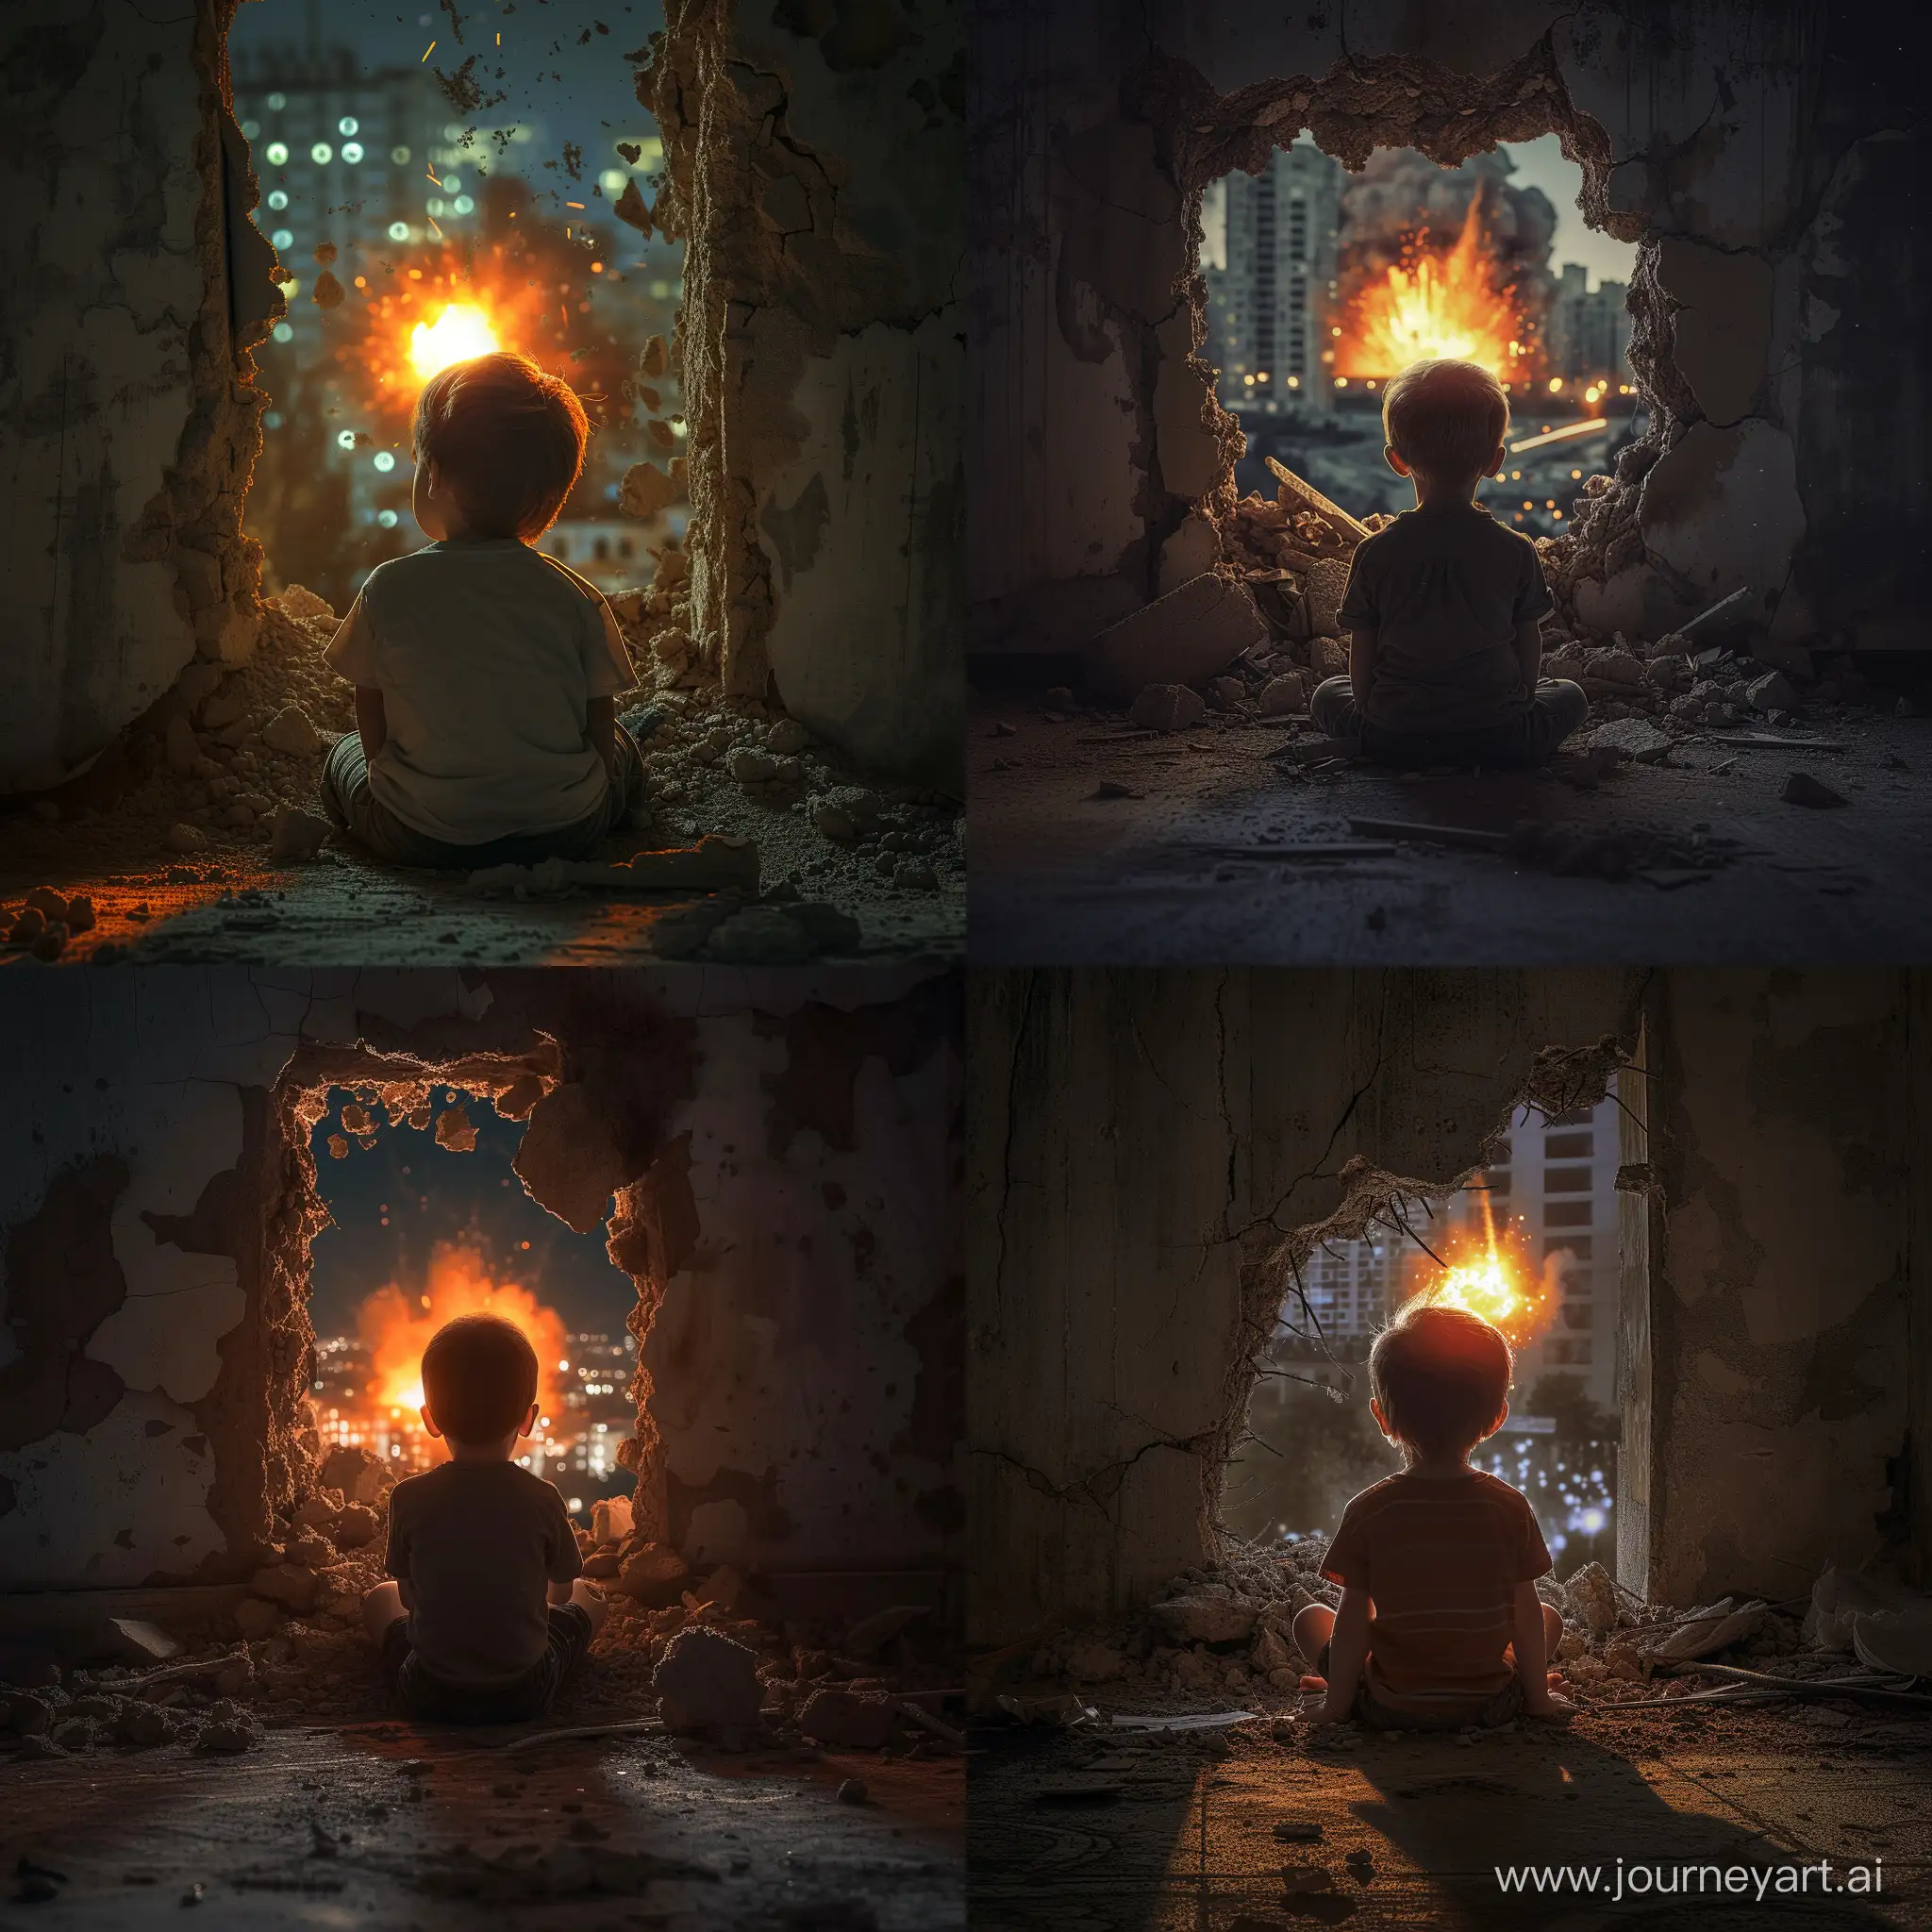 Adorable-Boy-Gazing-at-Nuclear-Explosion-in-Abandoned-Room